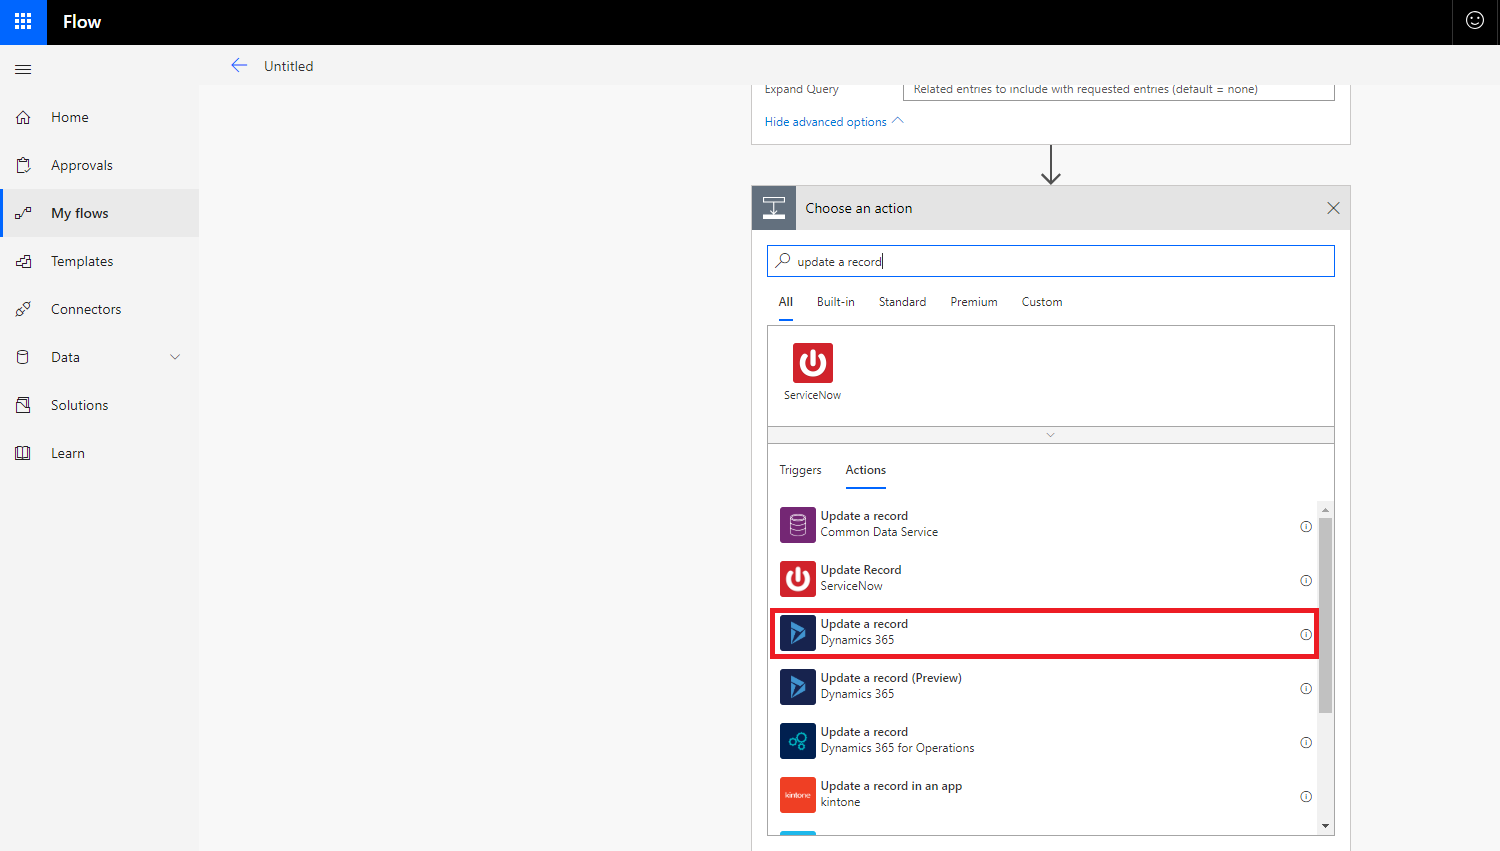 How to update a record in Microsoft Flow